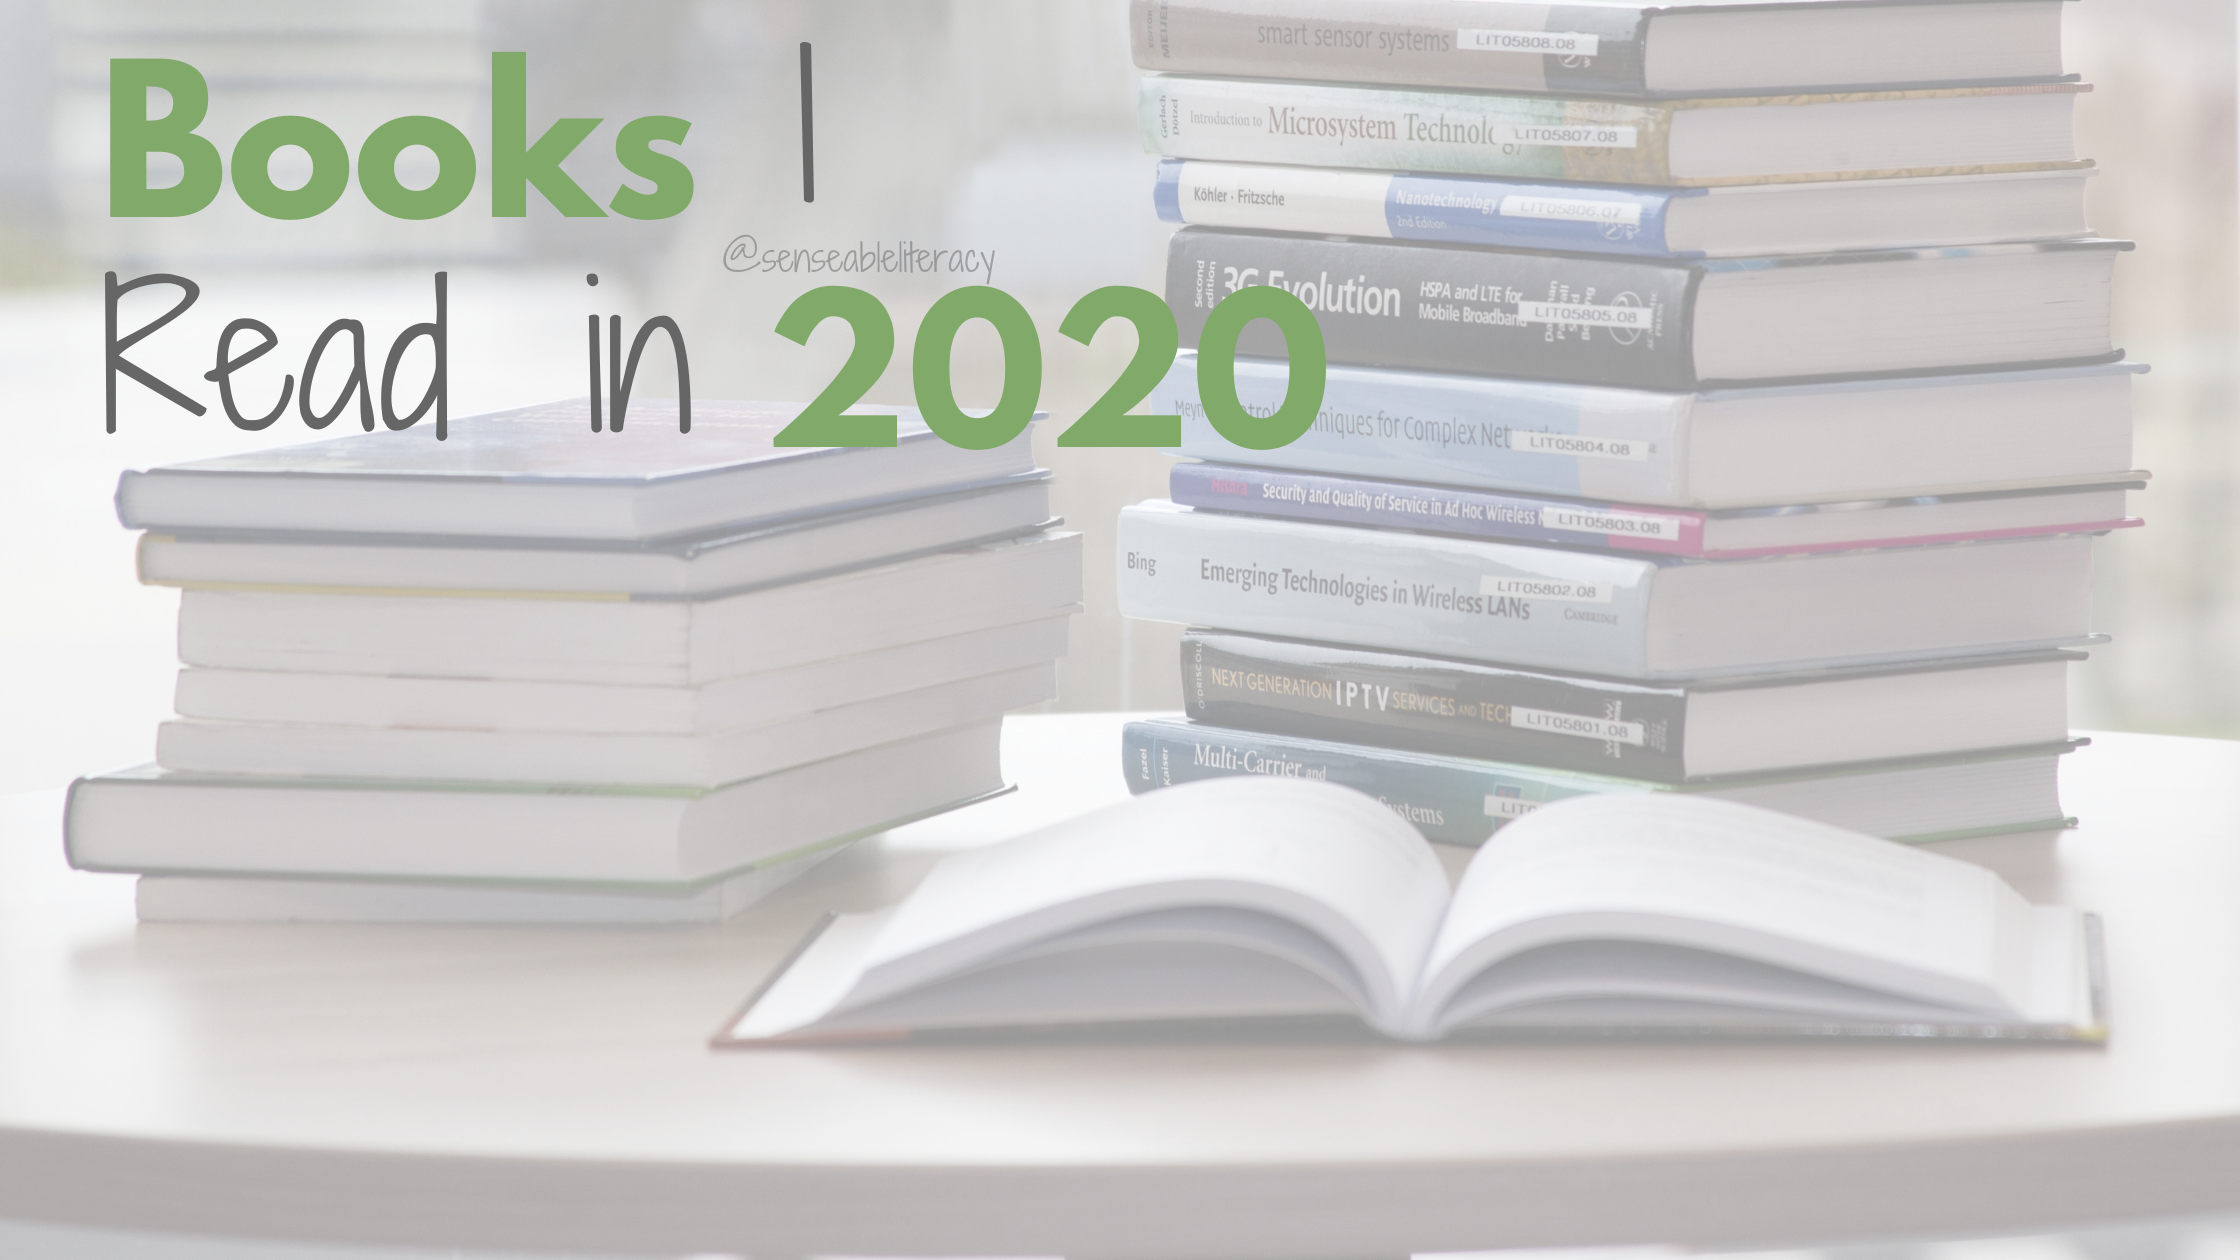 image stating: "Books I Read in 2020" with book stacks and an open book in the background